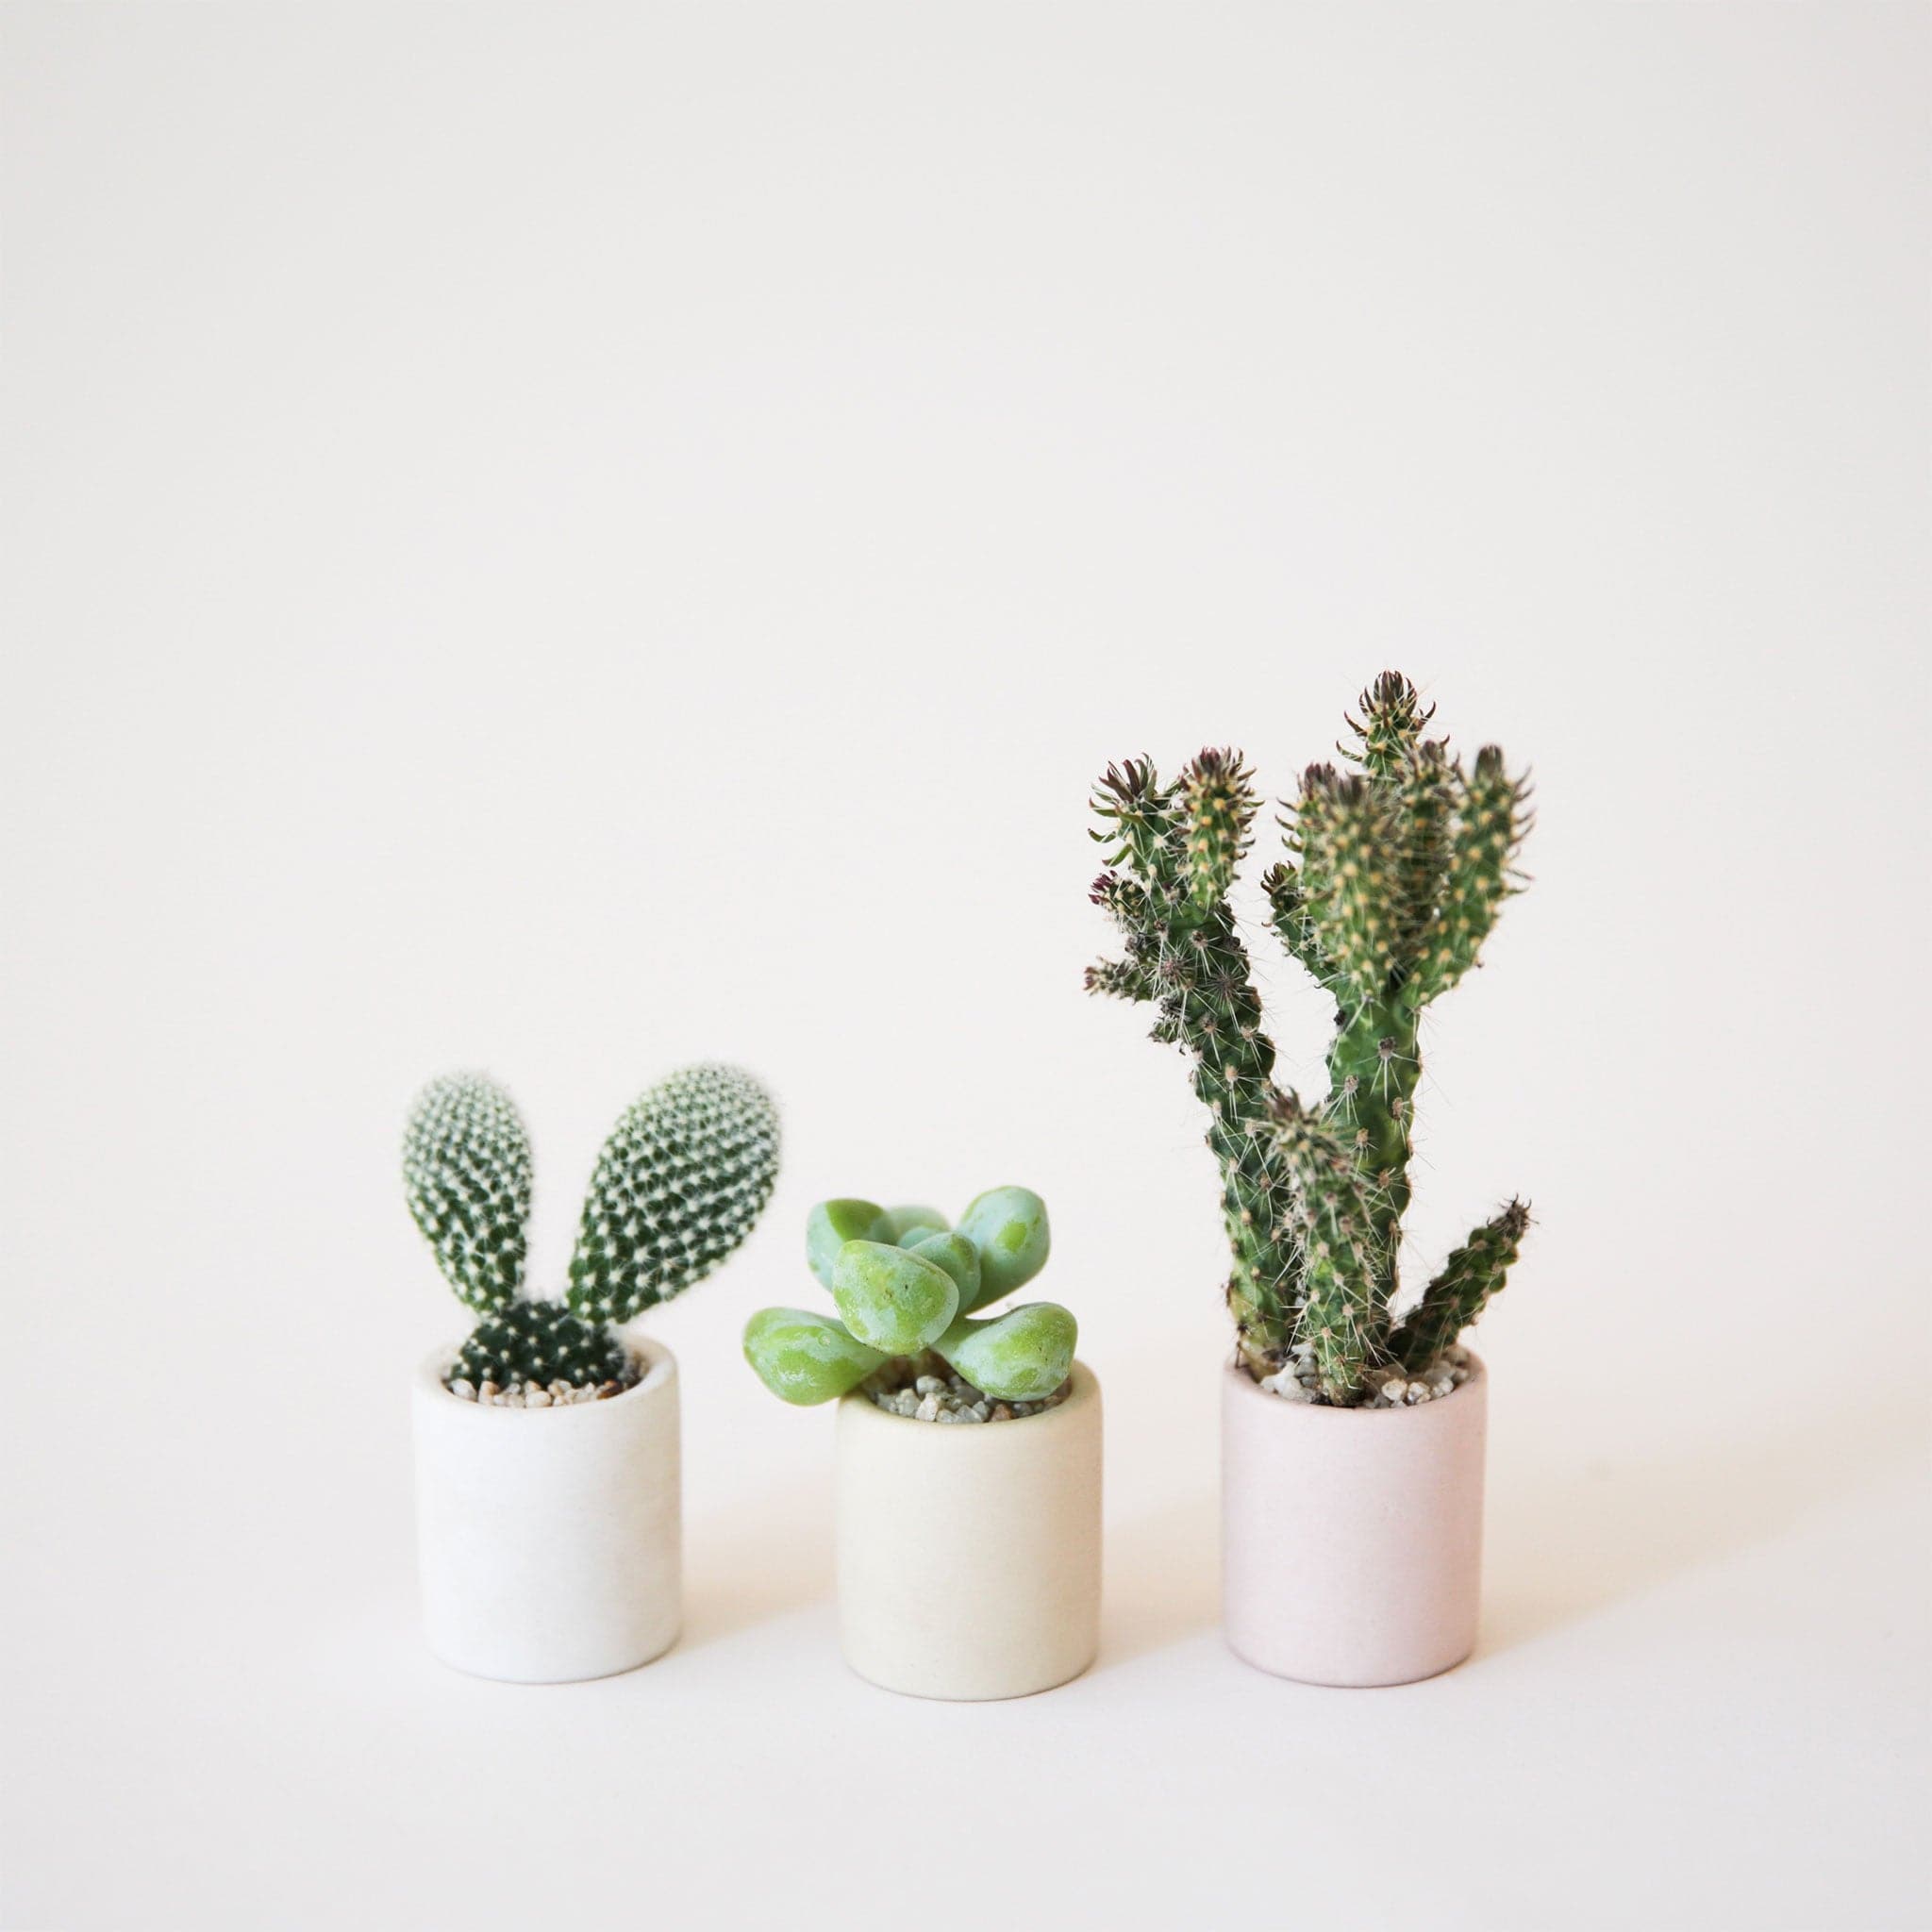 On a neutral background is a tiny beige ceramic pot with a small succulent or cacti inside.